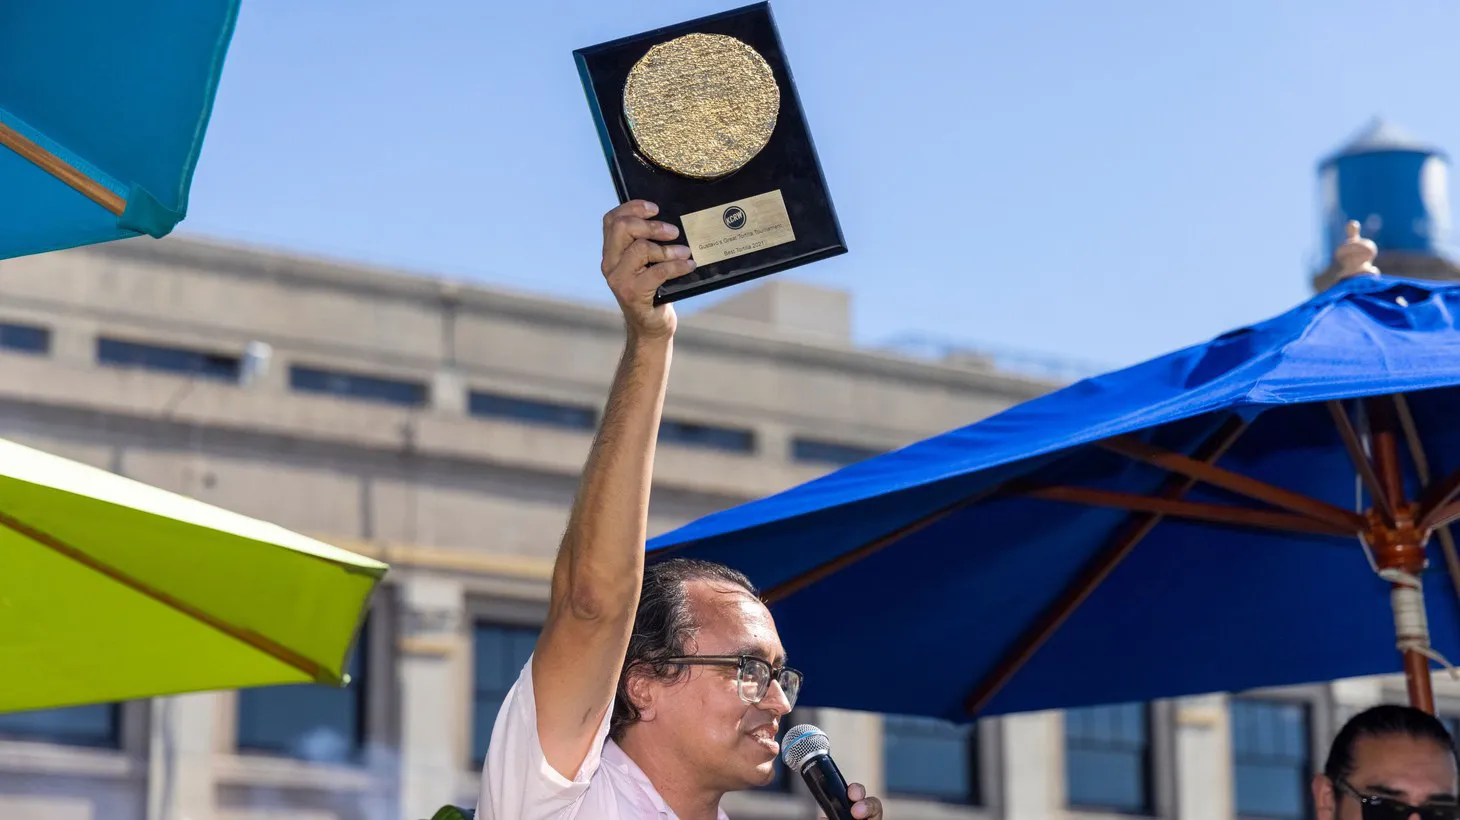 Gustavo Arellano married his love of sports with a lifetime of eating tortillas to conceive of Gustavo’s Great Tortilla Tournament, with the final tasting taking place at Smorgasburg on October 16.